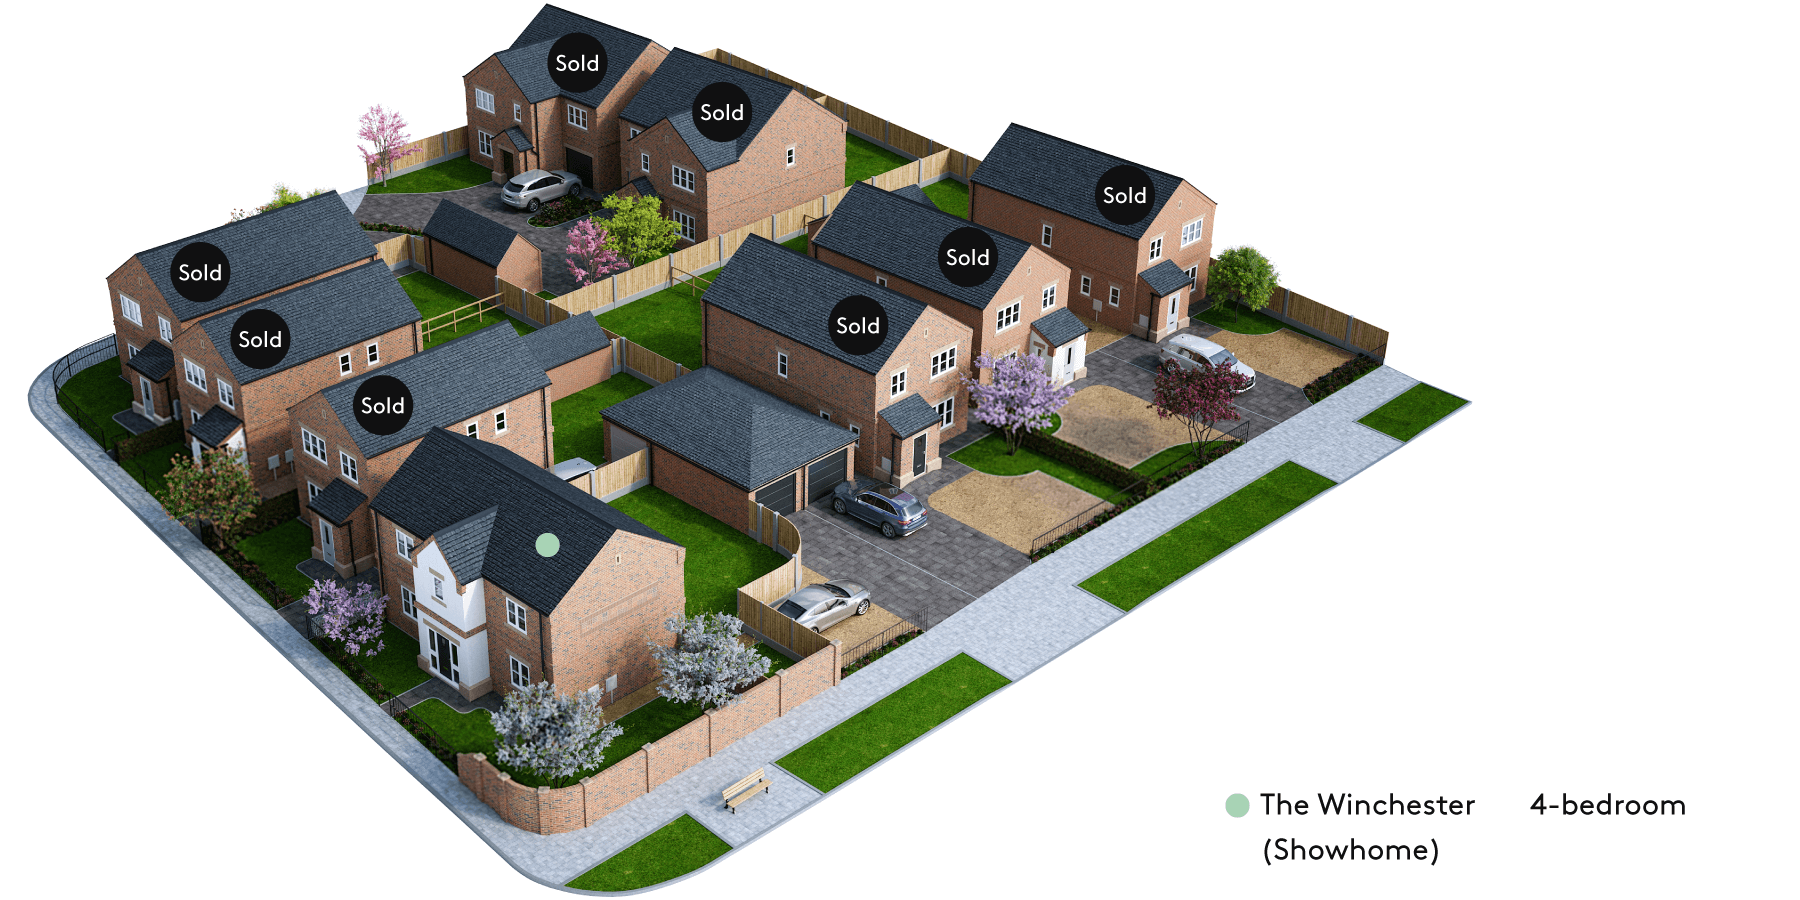 Finningley Court site plan - The Winchester